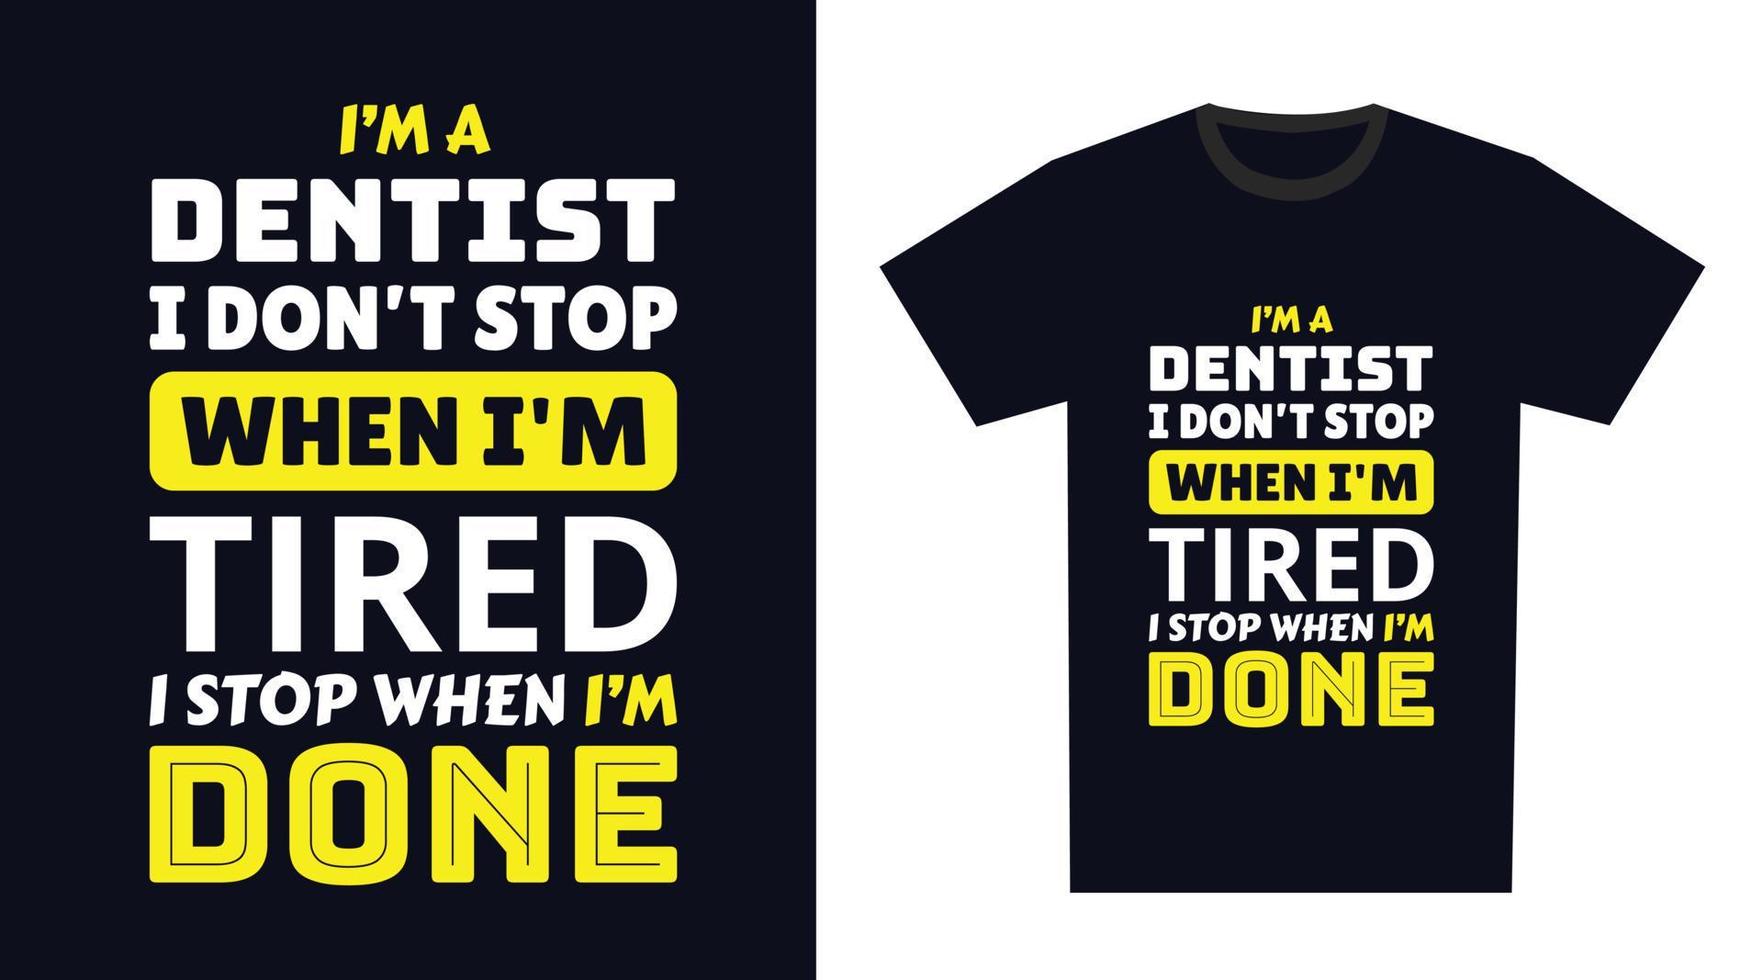 Dentist T Shirt Design. I 'm a Dentist I Don't Stop When I'm Tired, I Stop When I'm Done vector